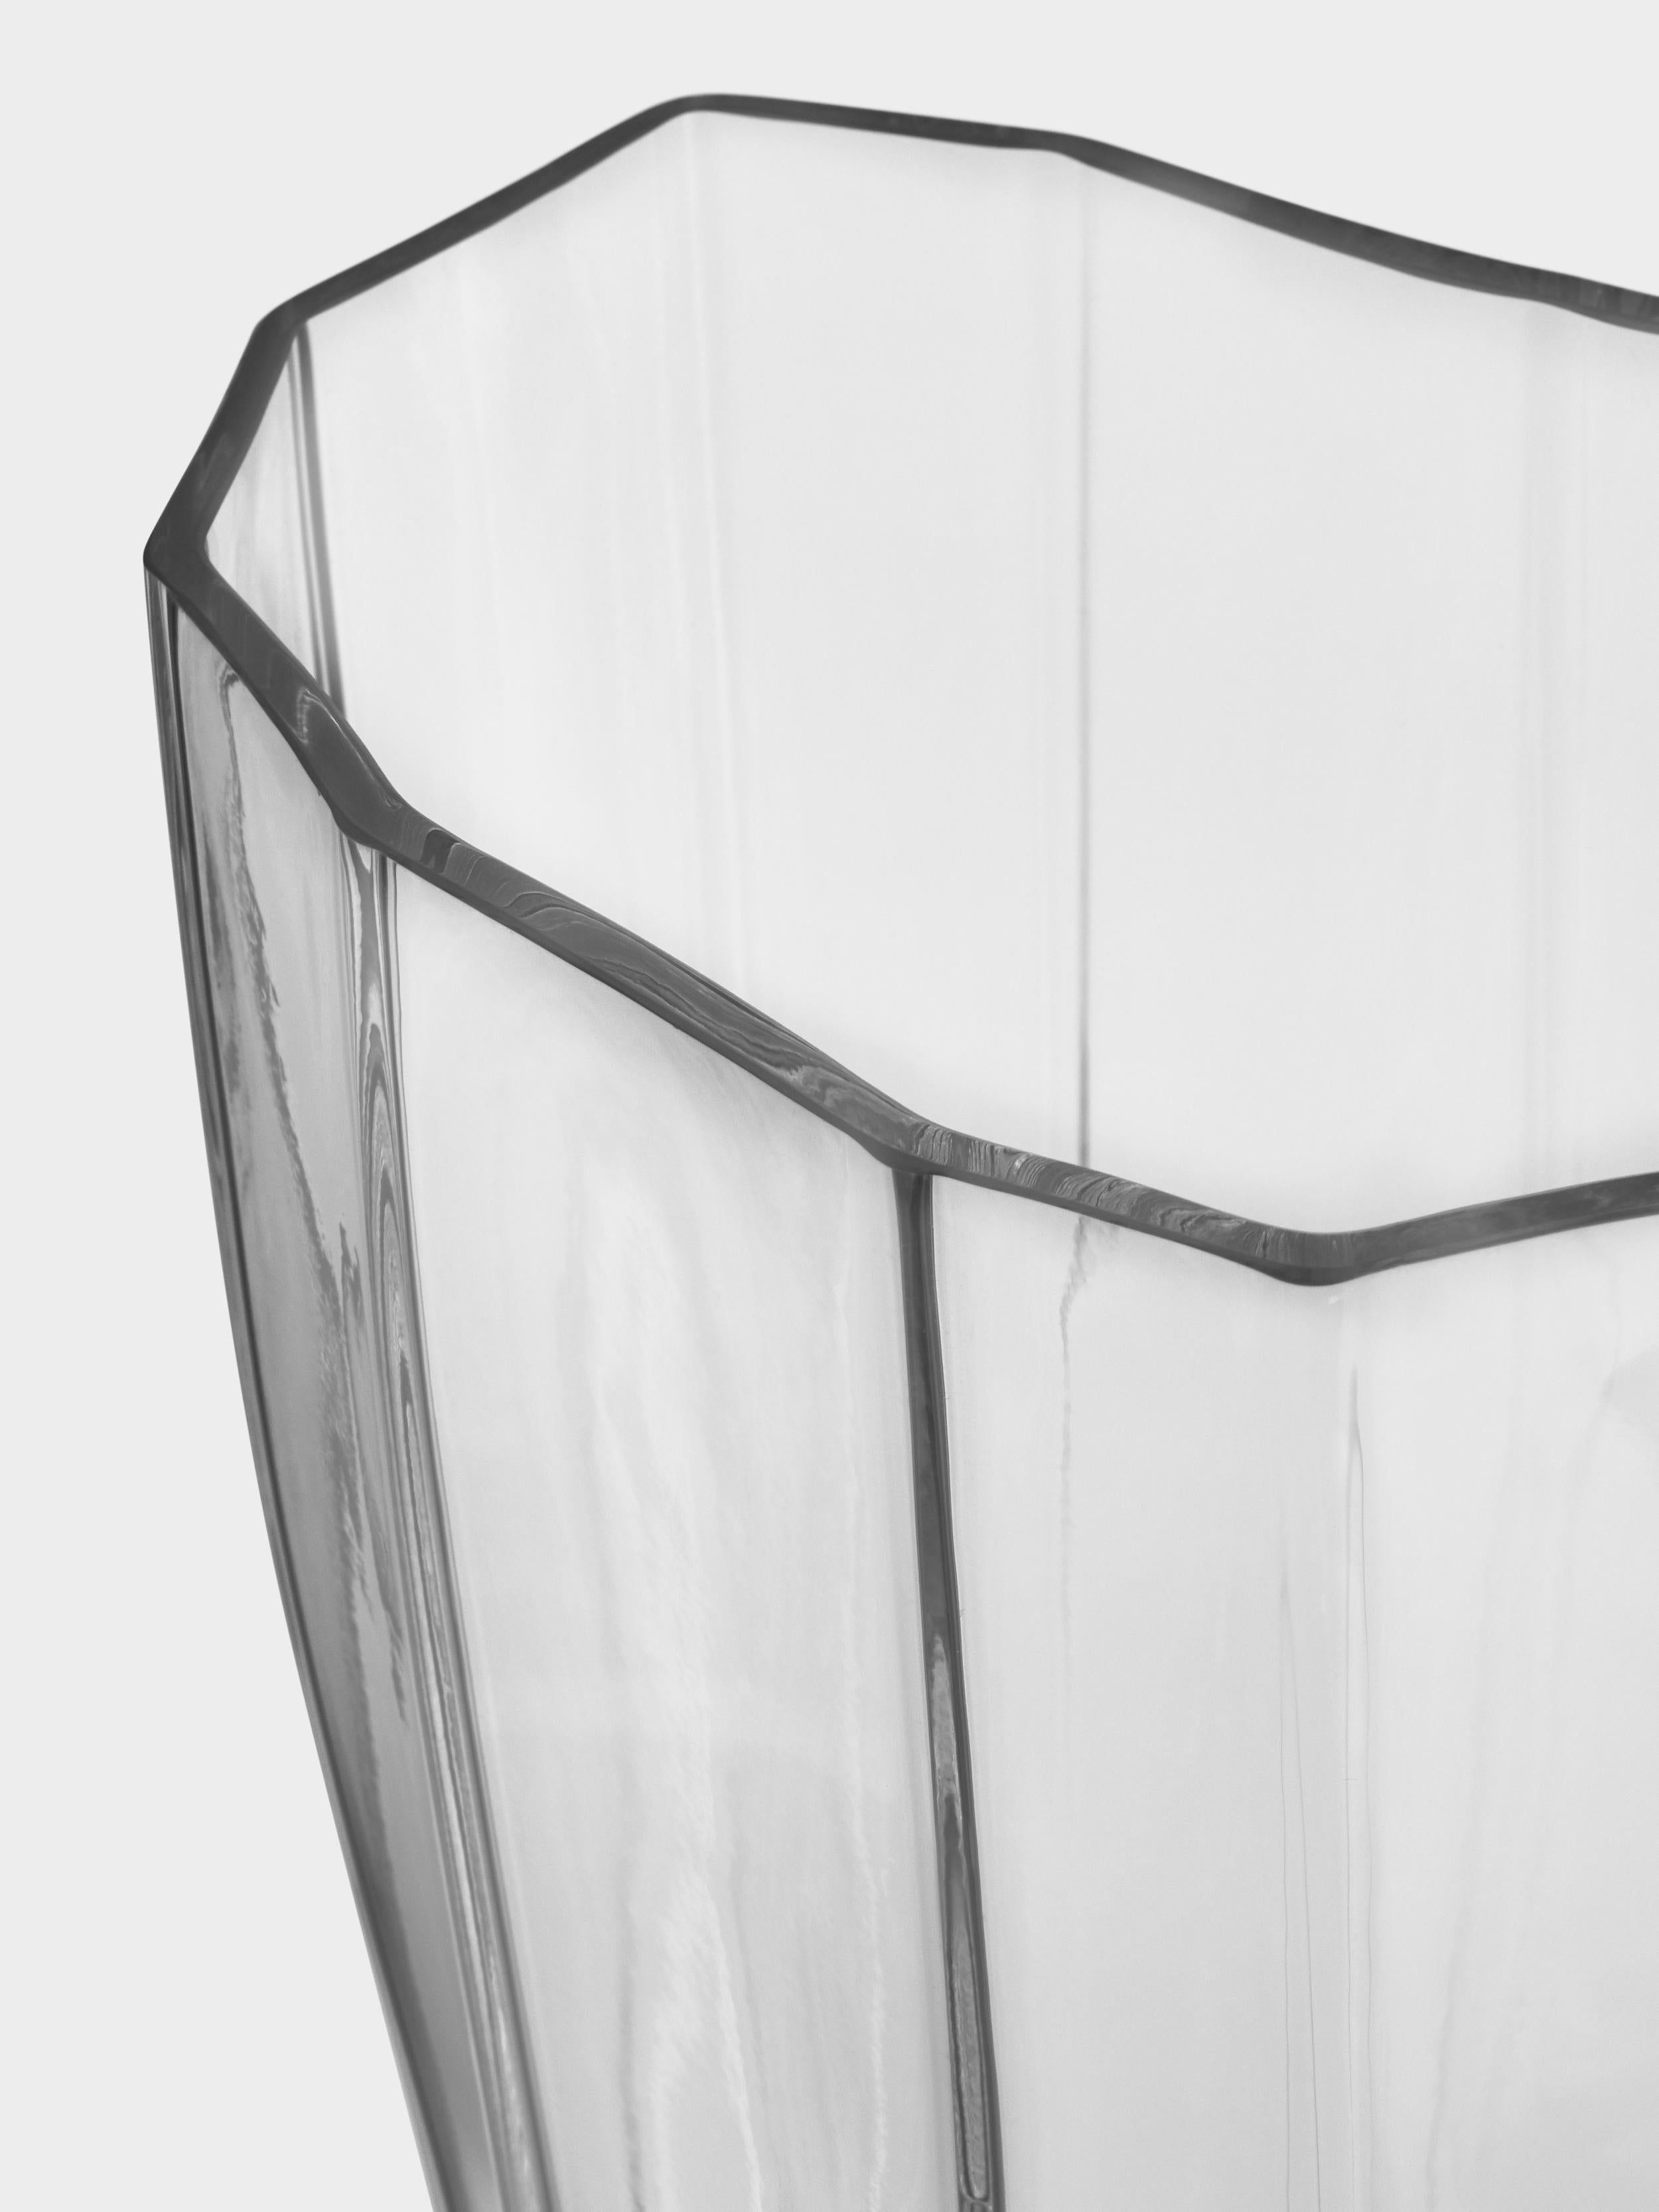 With Reed, Swedish designer Monica Förster shows how to create a sense of organic movement by emphasizing folds. A quiet sway in the solid, clear glass. The medium-size Reed is suitable for hand-picked florals and cut flowers.
